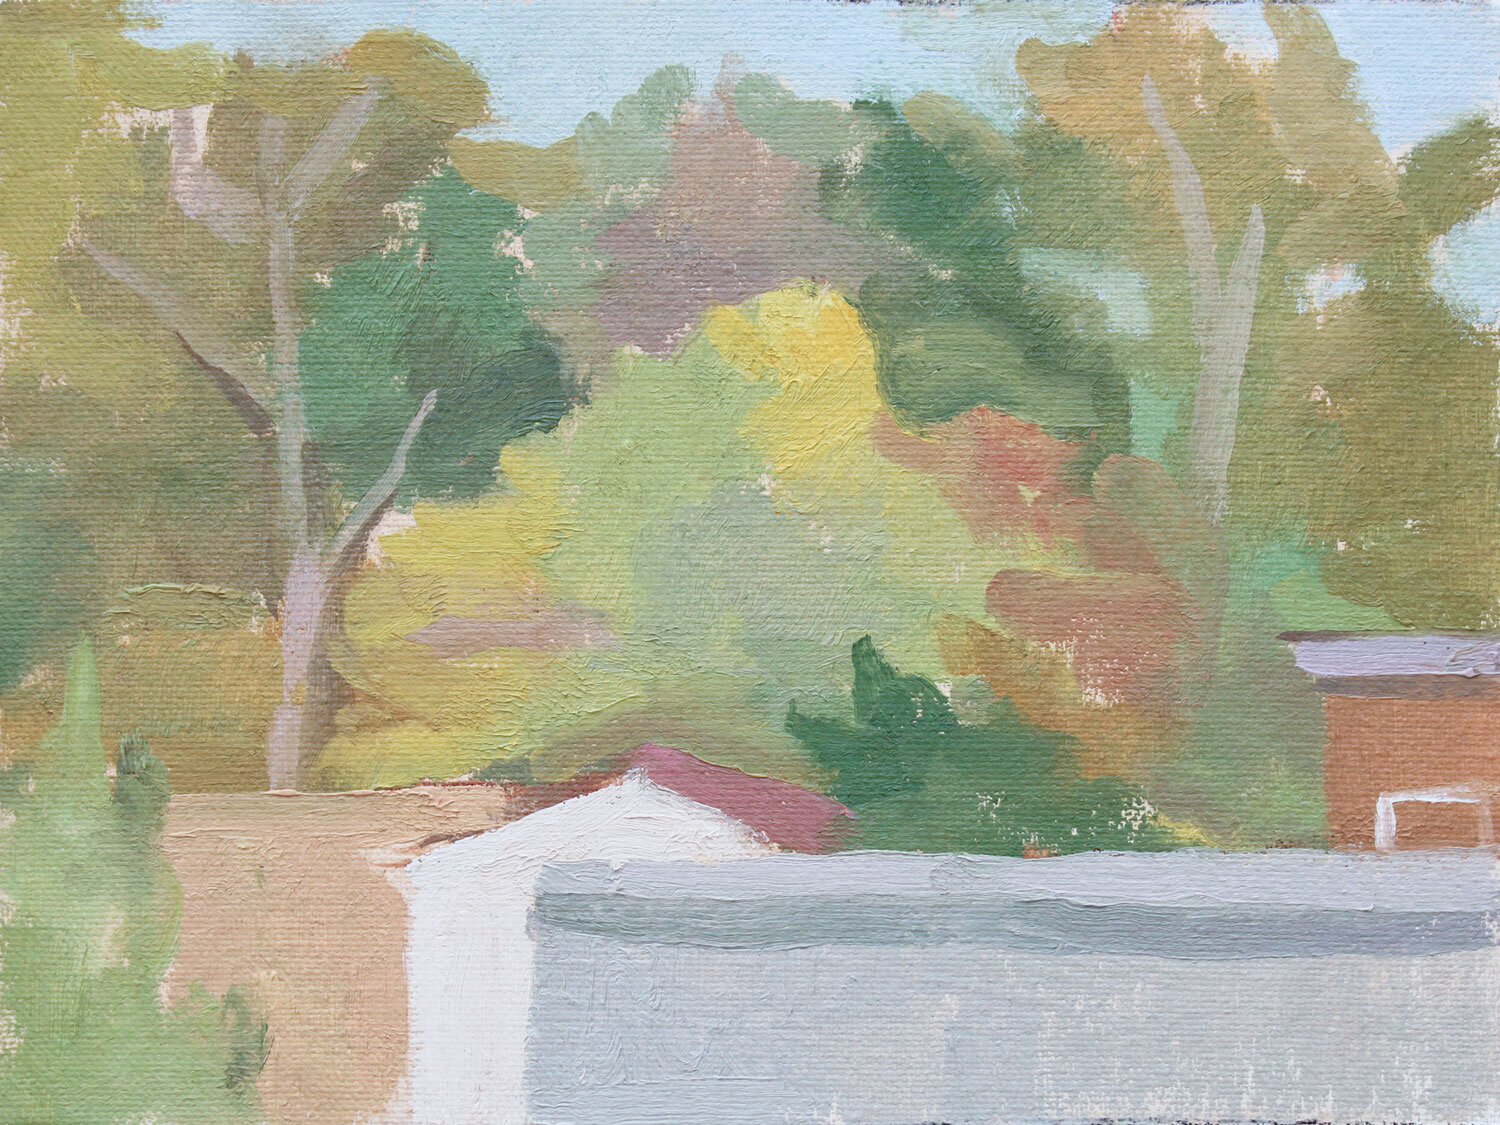    Northeast Fall   oil on canvas 6 x 8” 2019   purchase  